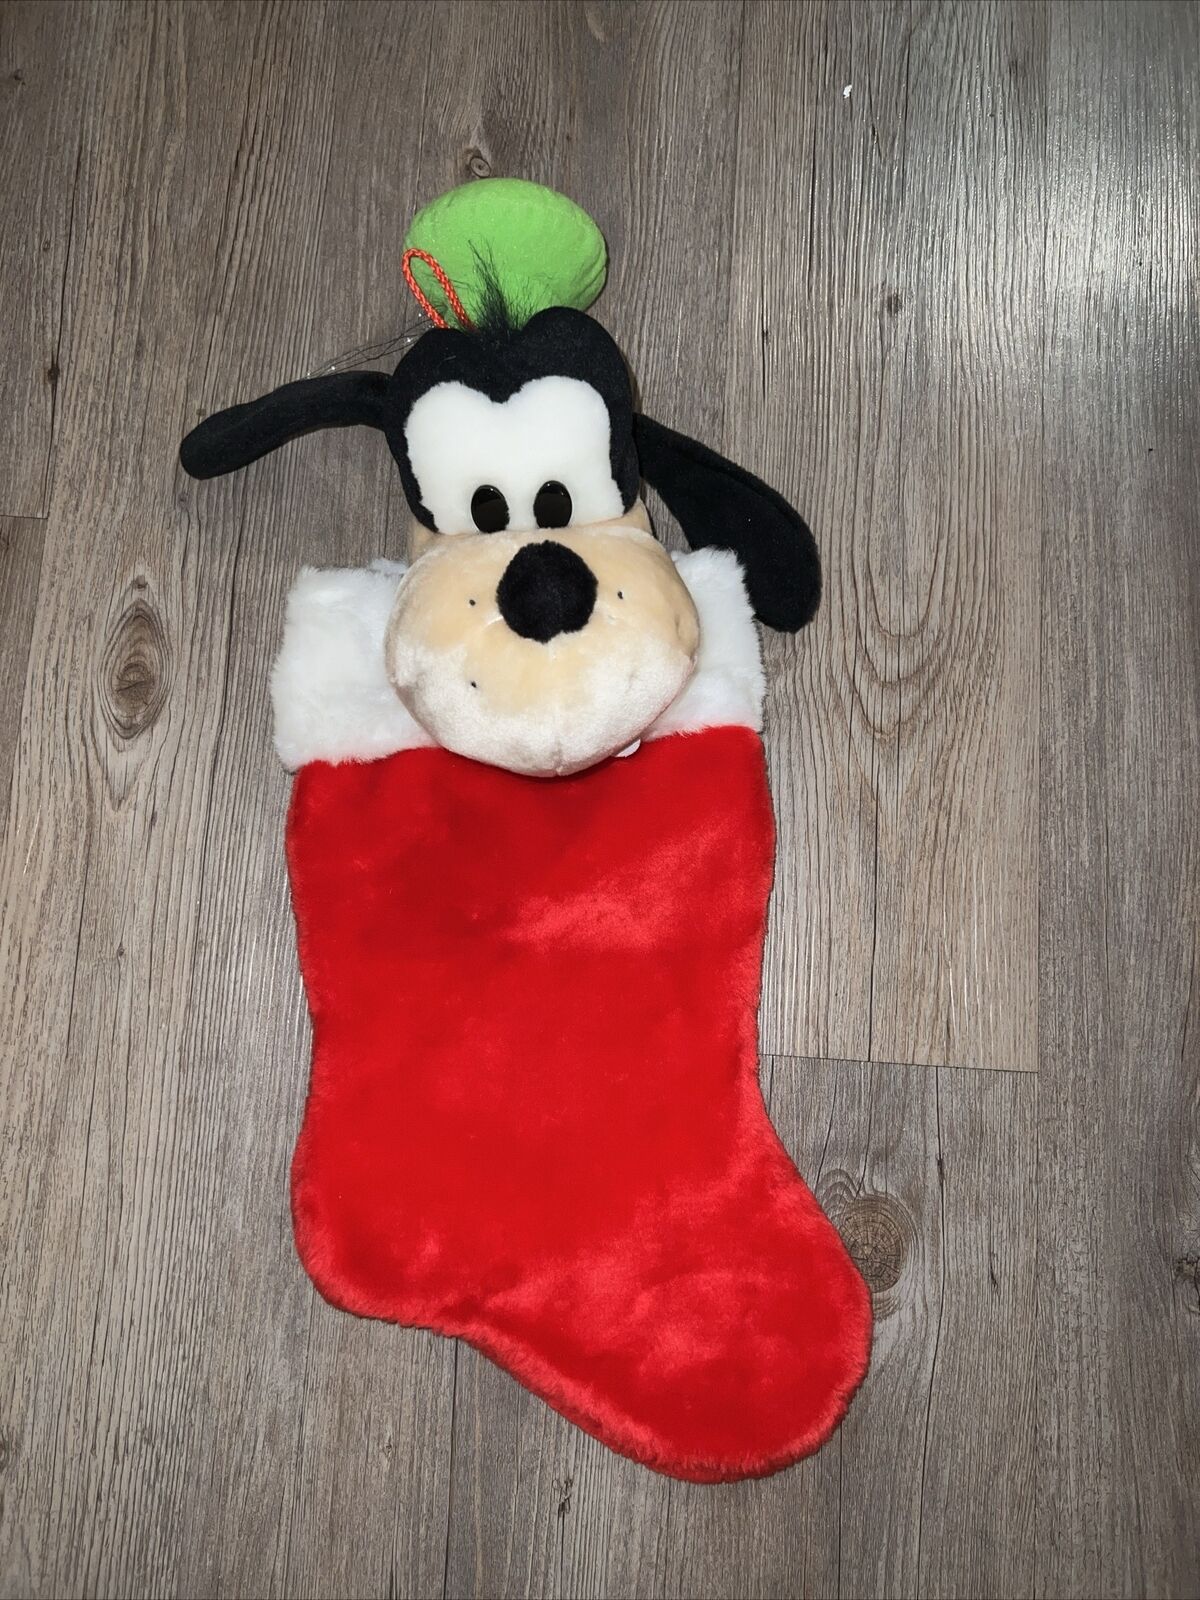 Vintage Disney 3-D Goofy Plush Red 21” Christmas Stocking New Old Stock CUTE